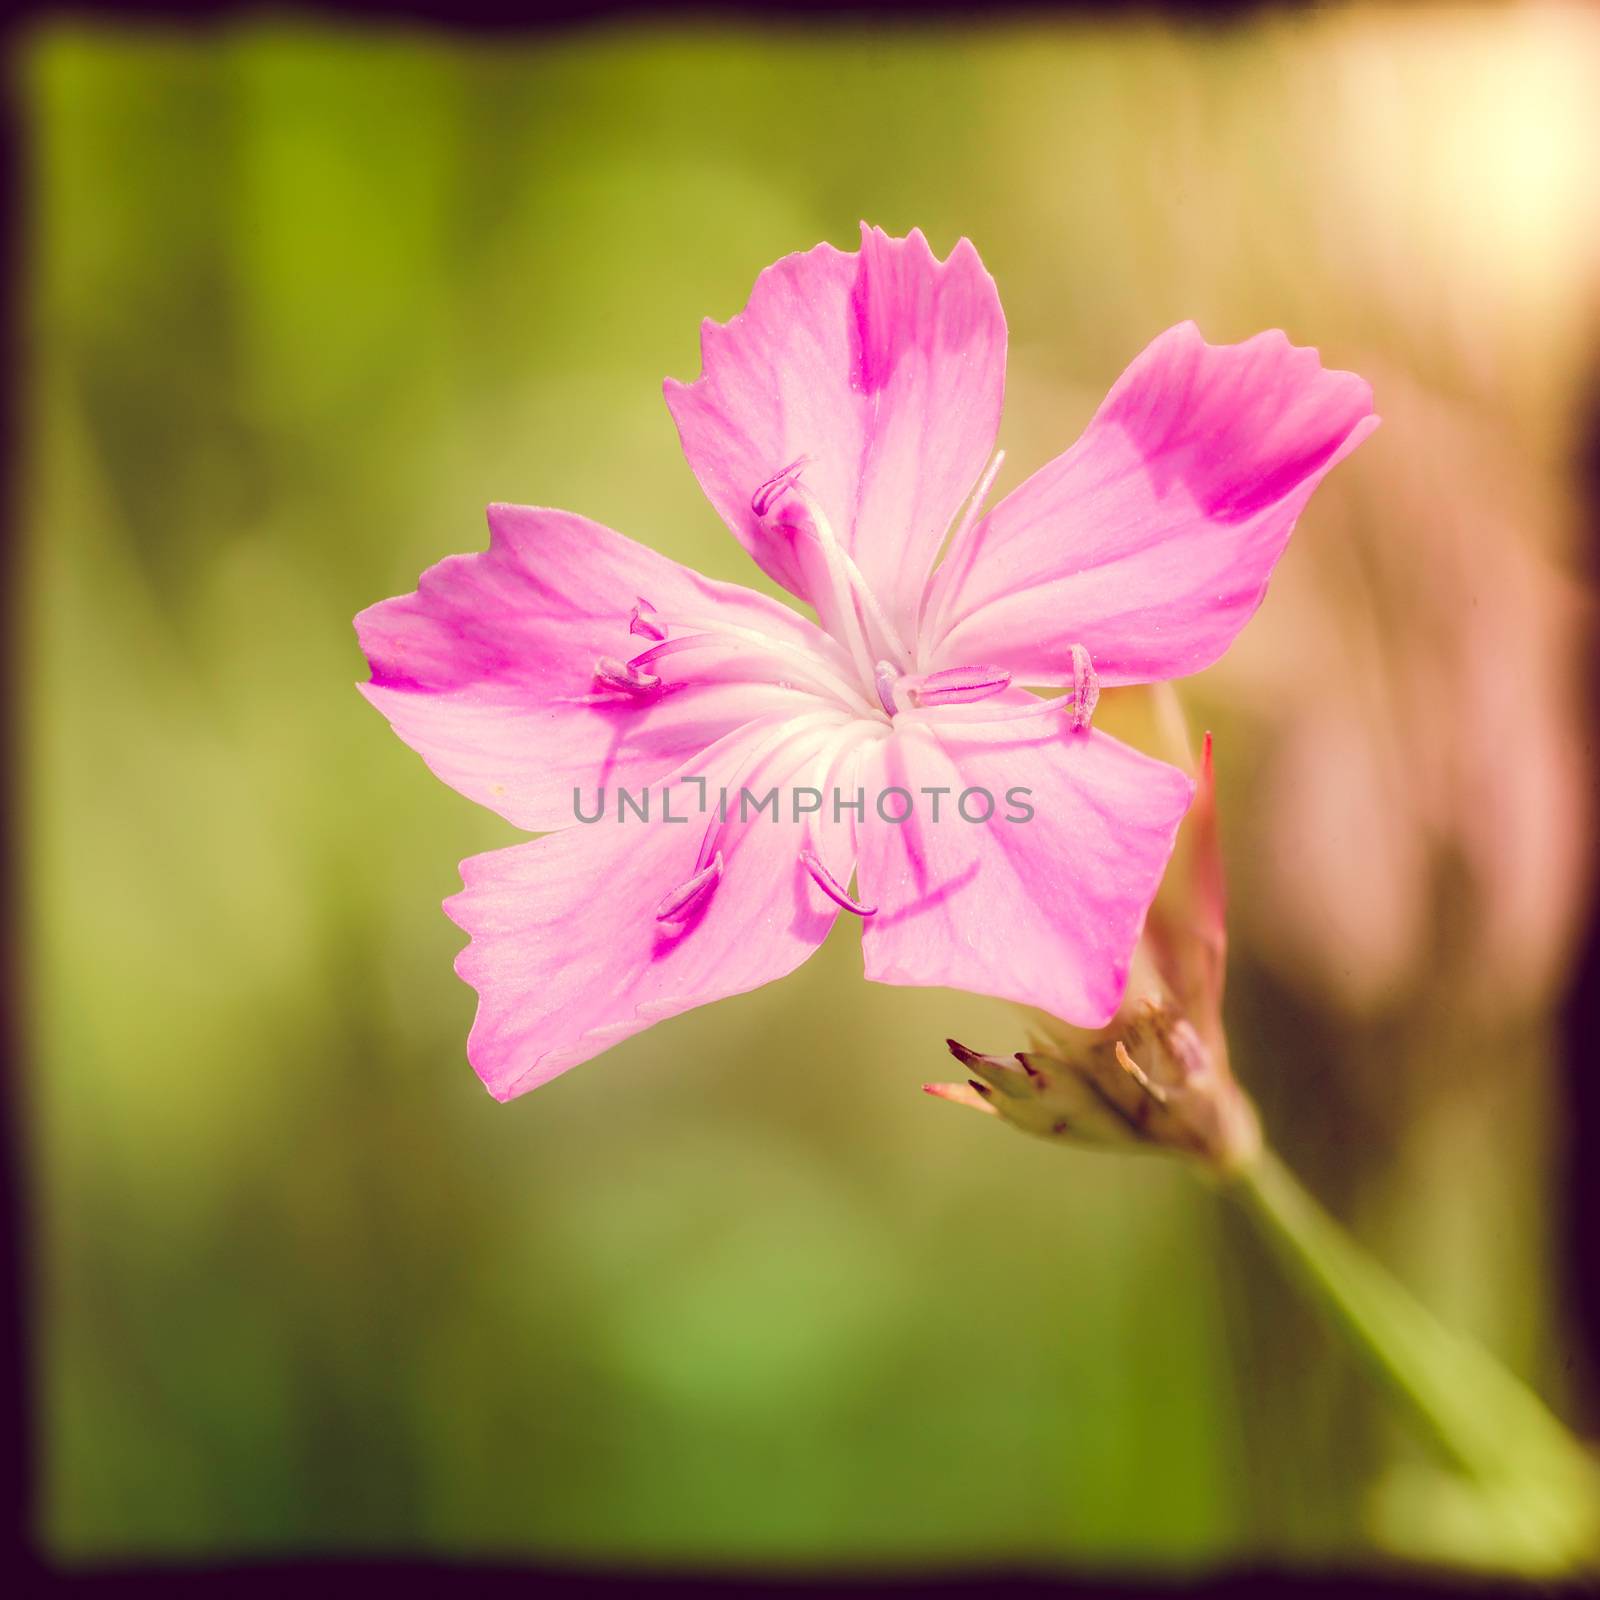 Deptford Pink or Dianthus Armeria in a green meadow under the warm spring sun, with instagram effect